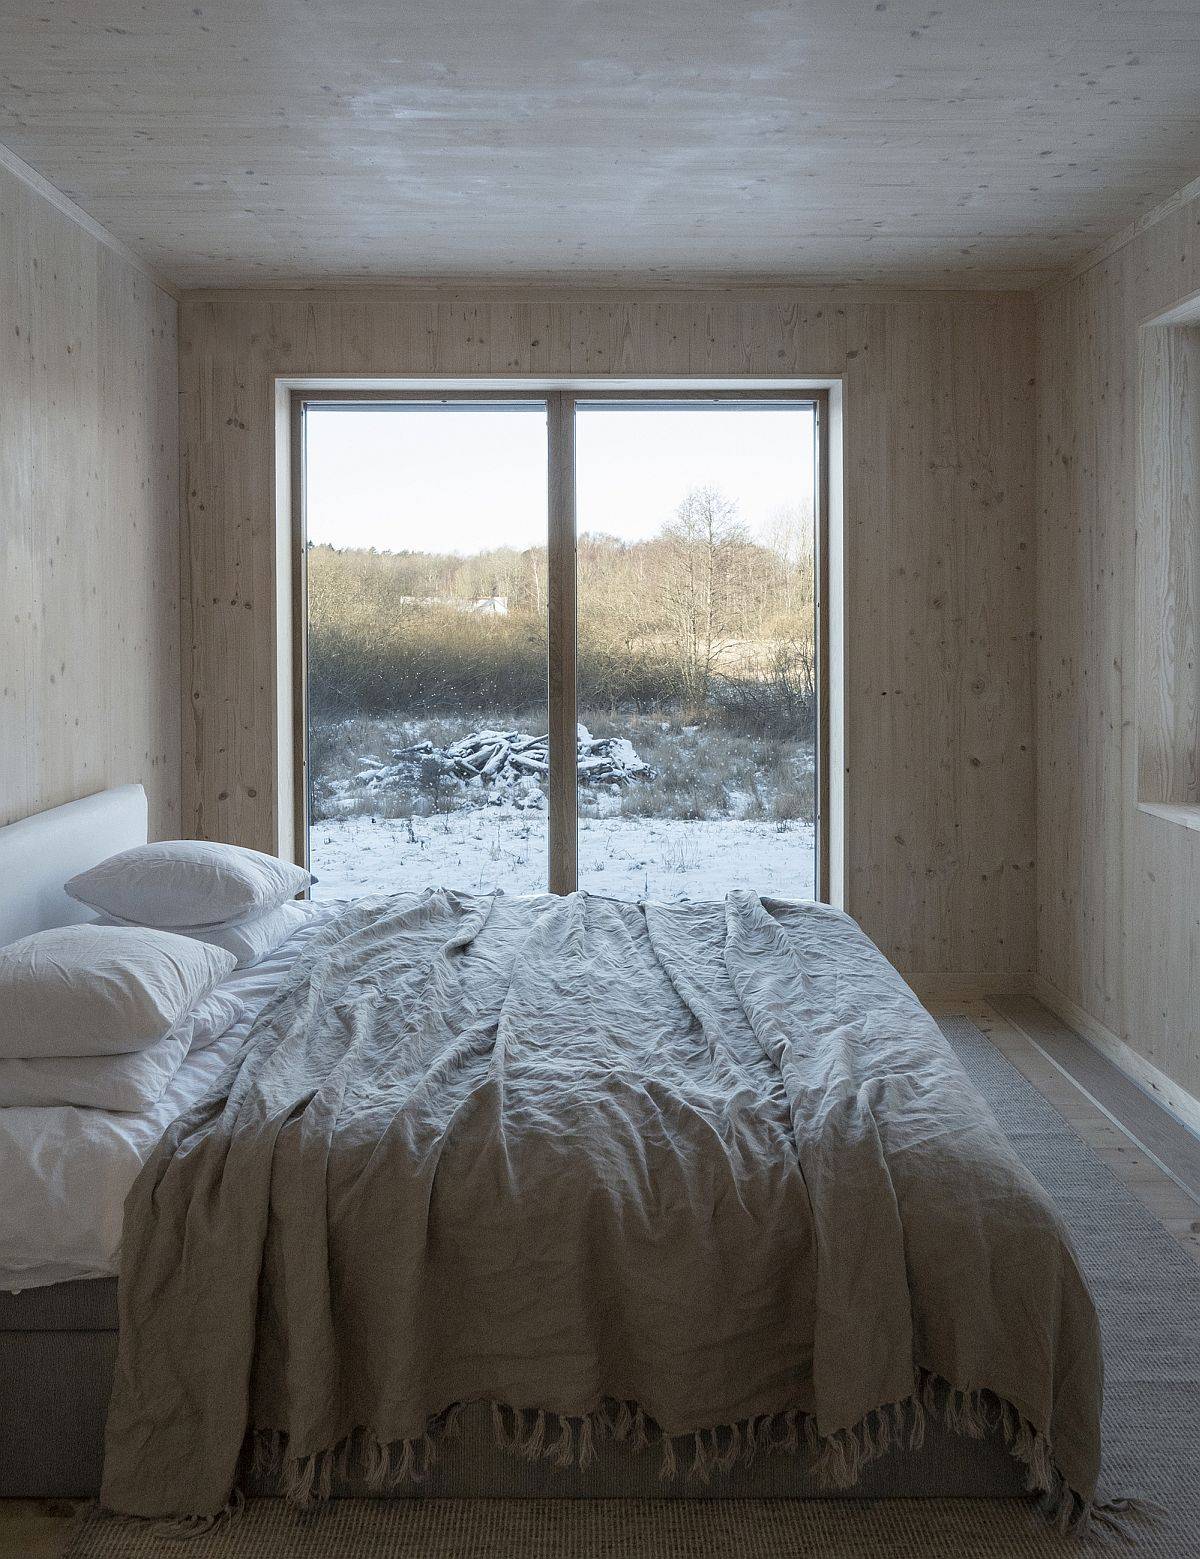 Small-and-cozy-bedroom-in-wood-with-beautiful-views-of-snow-clad-landscape-24706